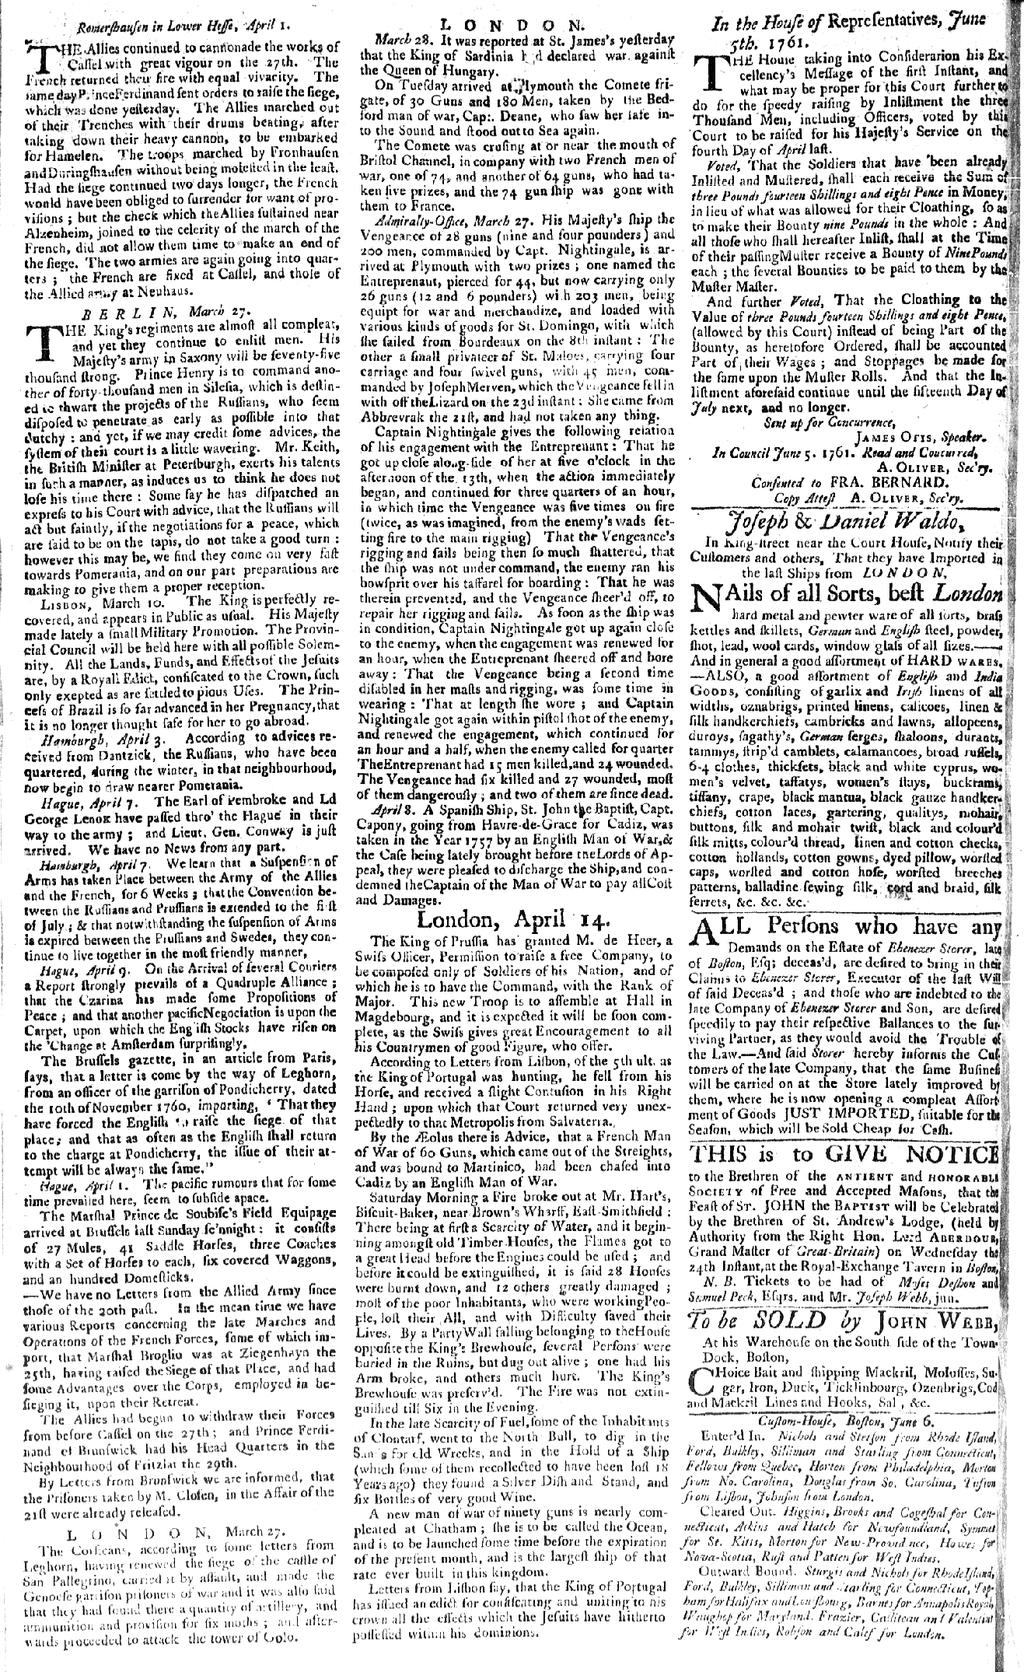 ATLANTIC HISTORY Figure 1. Green & Russell s Boston Post-Boy & Advertiser,June8,1761,p.2,withamixofparagraphs and advertisements typical of the American press during the colonial era.